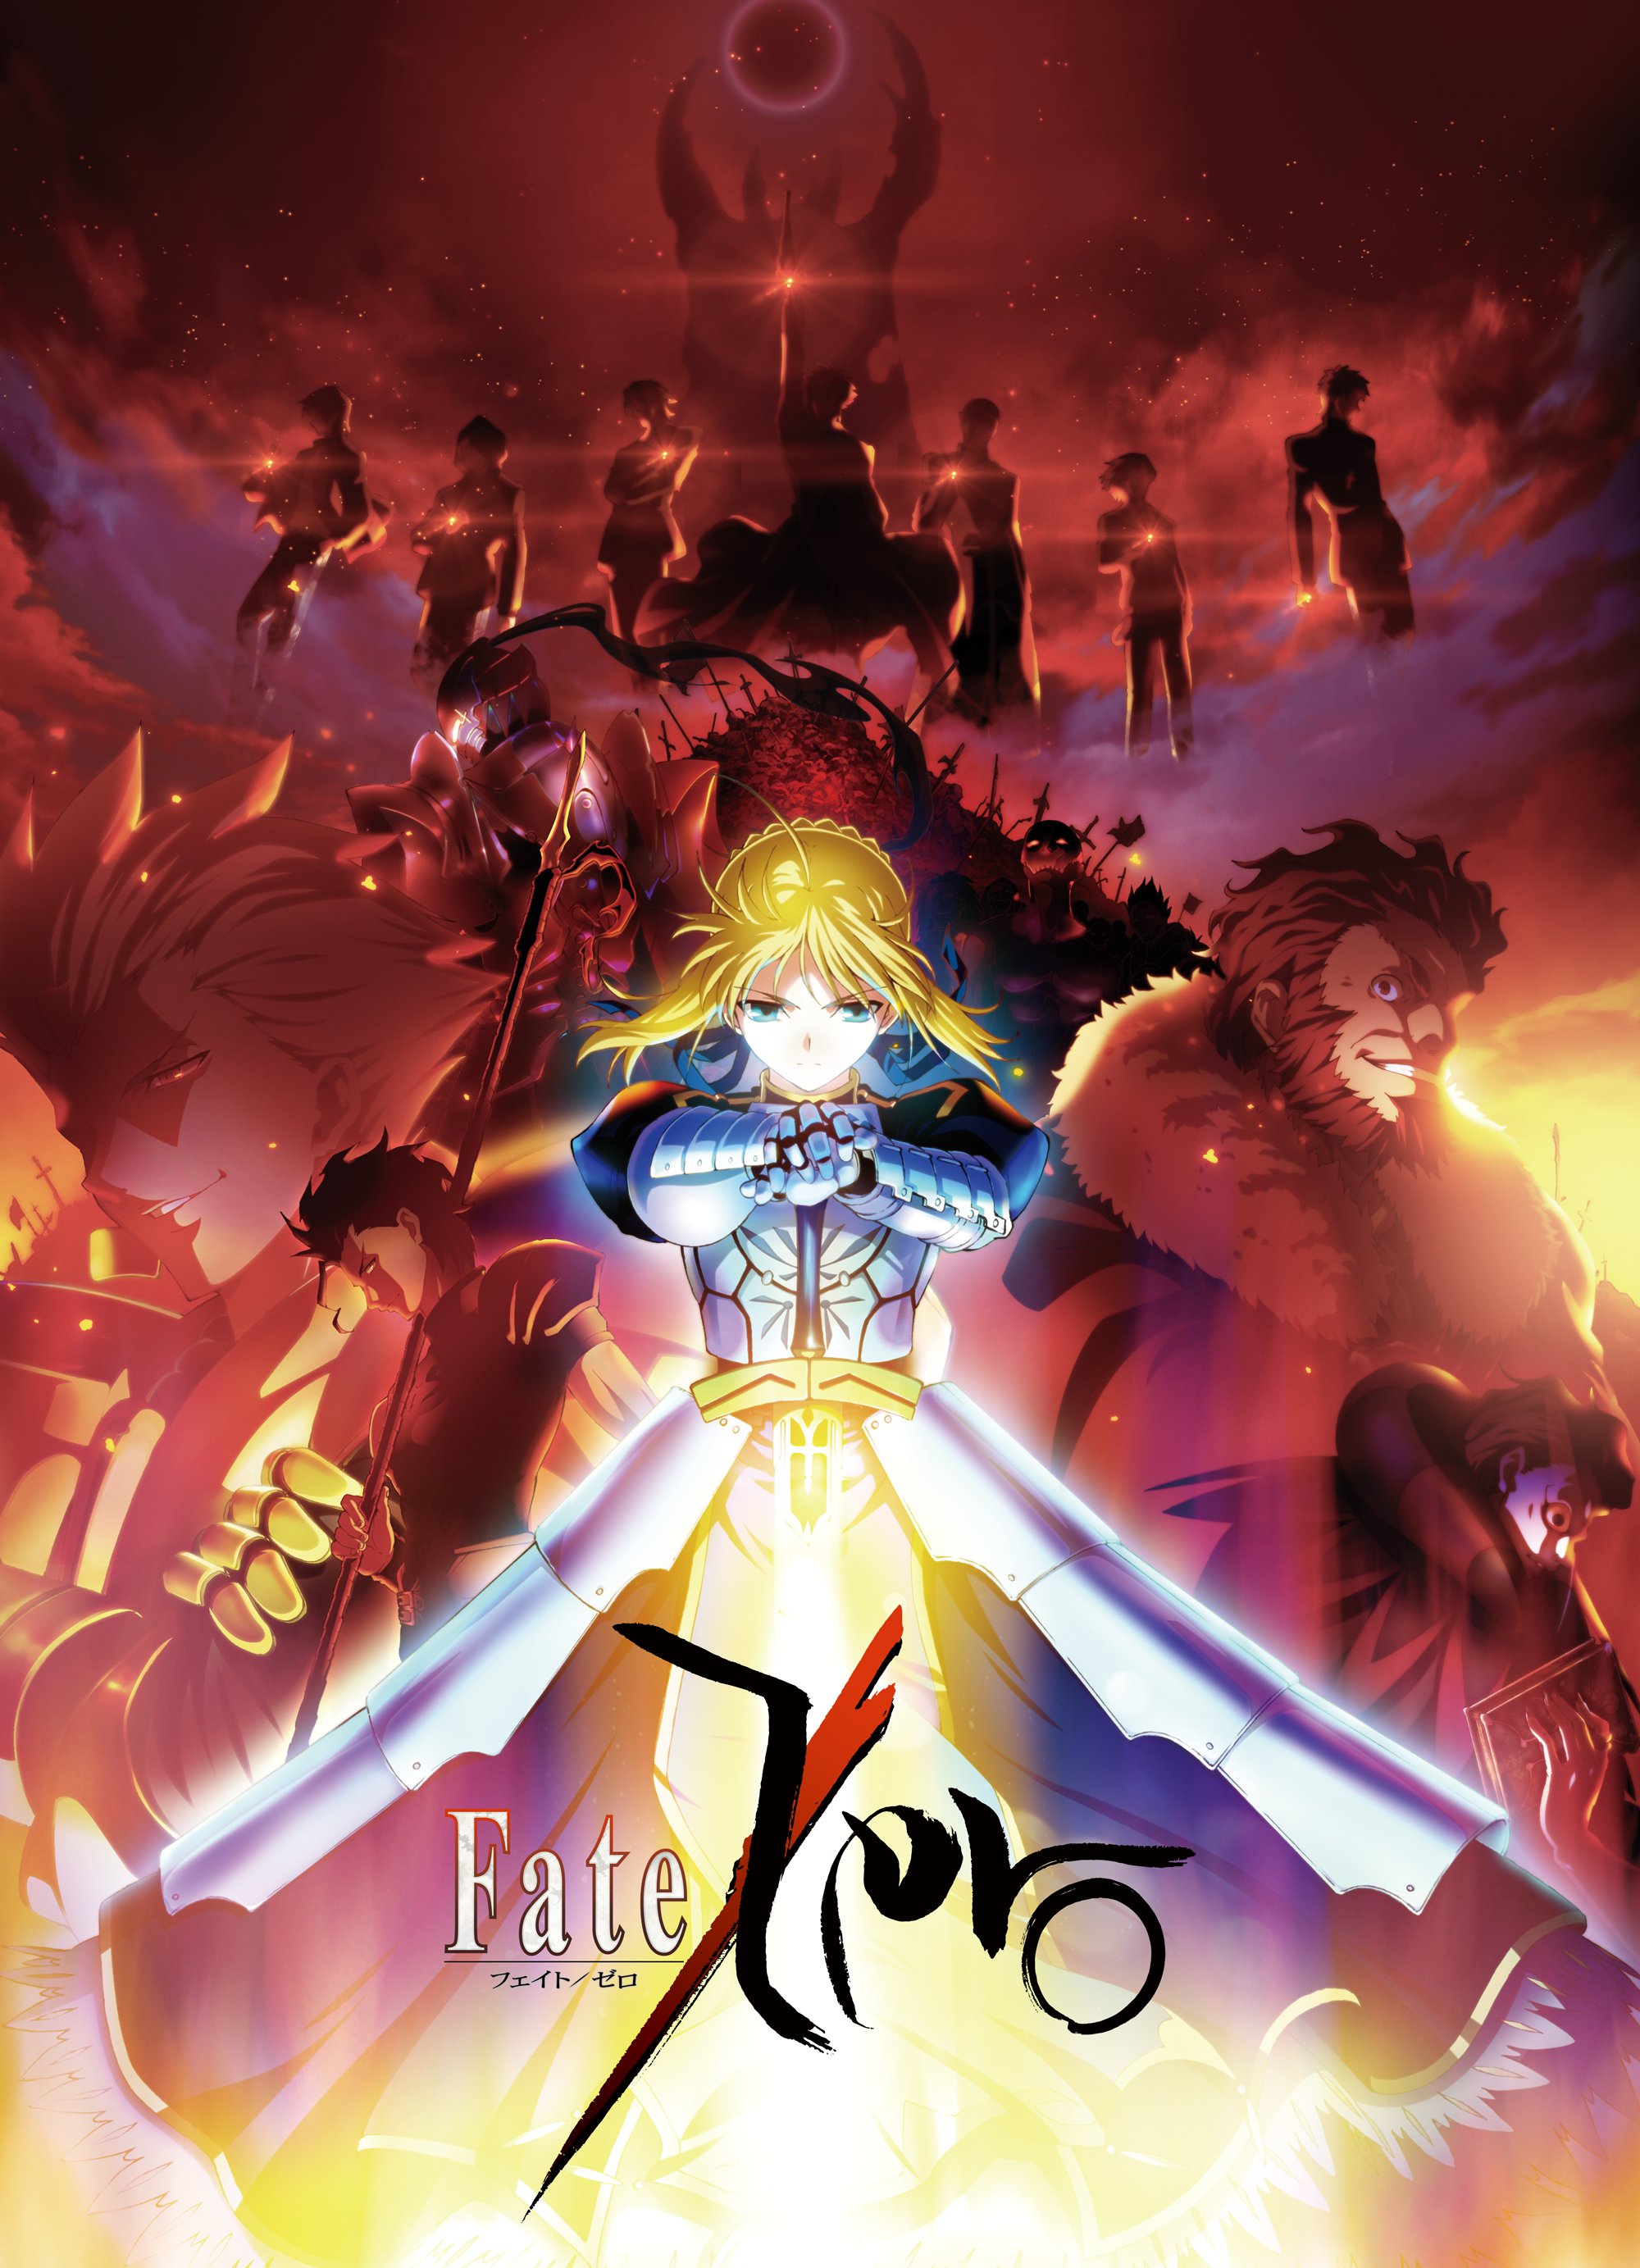 How to watch Fate anime chronologically  Watching order of Fate Anime   WorldWire